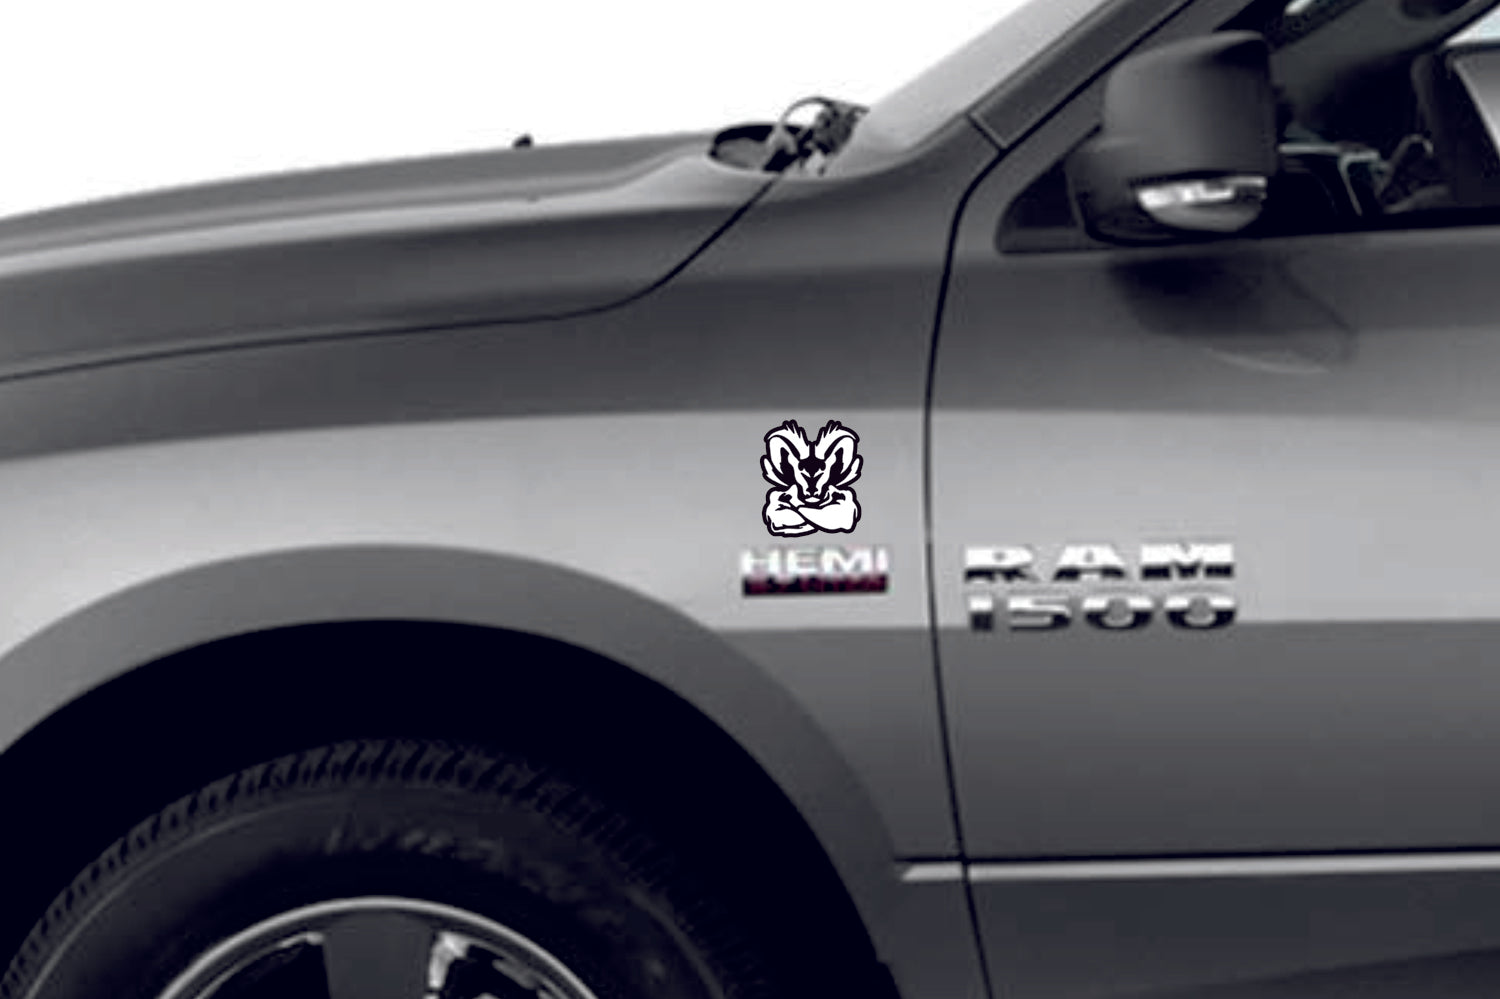 DODGE emblem for fenders with Strong Ram logo - decoinfabric